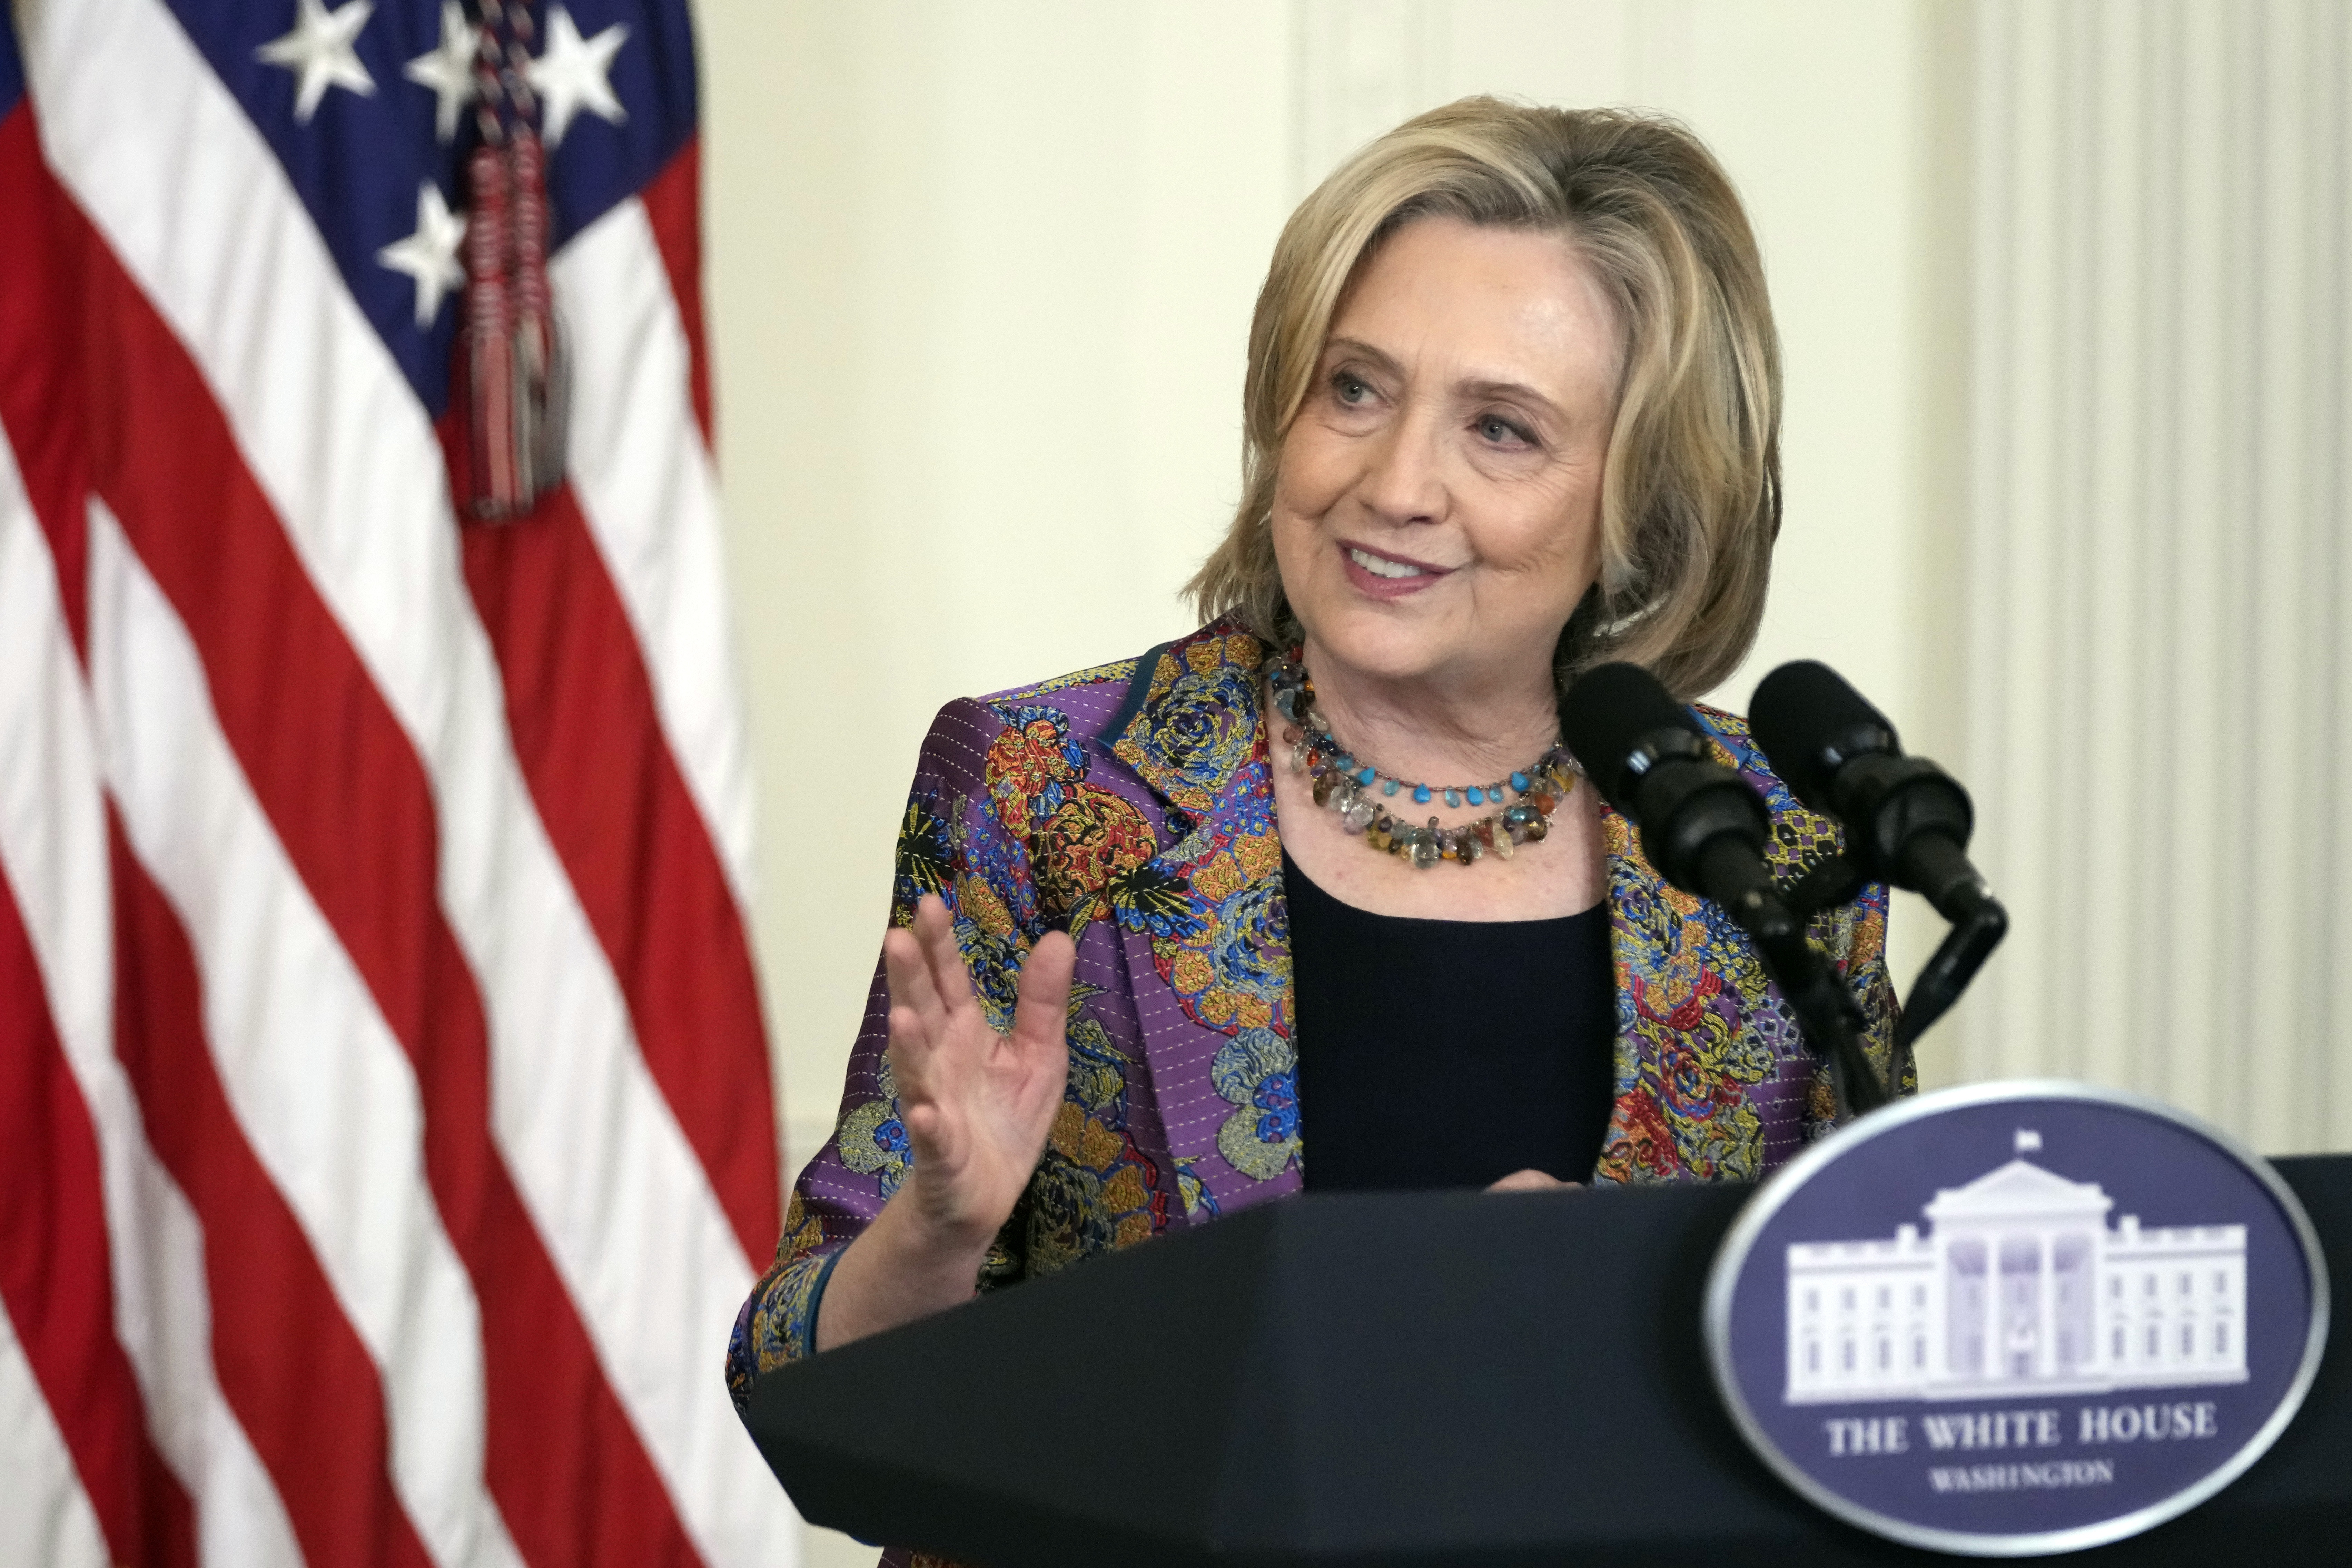 Hillary Clinton returning to the White House for an arts event